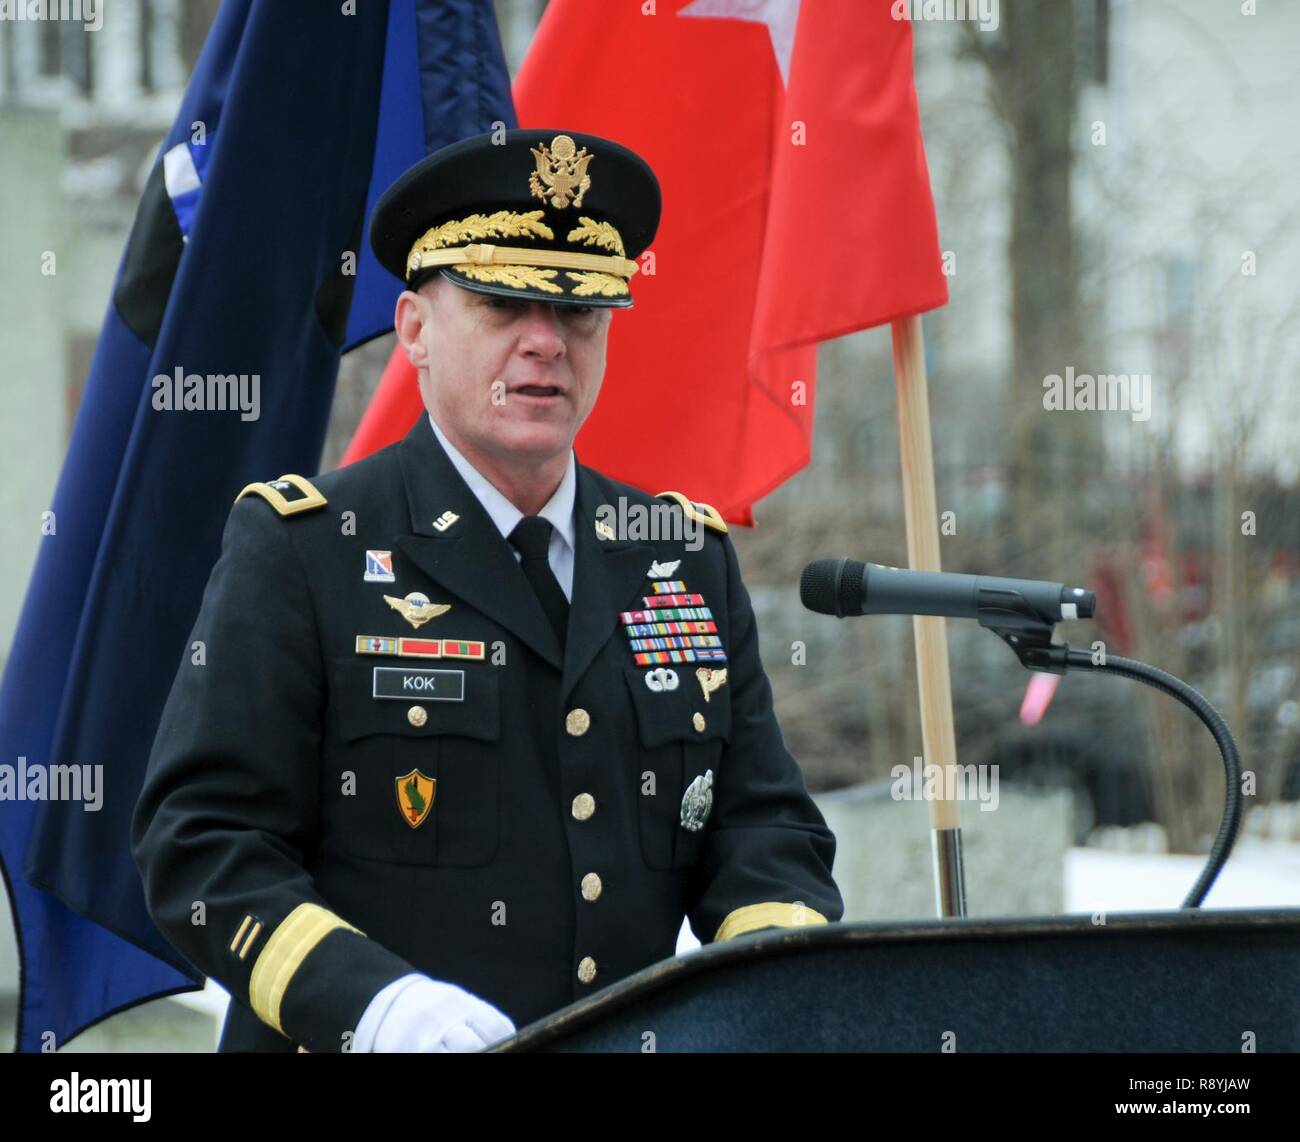 Maj. Gen. Troy D. Kok, commanding general of the U.S. Army Reserve’s 99th Regional Support Command, delivers remarks during the Presidential Wreath Laying event March 18 for President Grover Cleveland at Princeton Cemetery, New Jersey. Kok hosted and spoke at the event along with New Jersey State Senator Christopher “Kip” Bateman, Princeton Mayor Liz Lempert, and Mr. Robert J. Maguire, civilian aide to the Secretary of the Army for New Jersey. Stock Photo